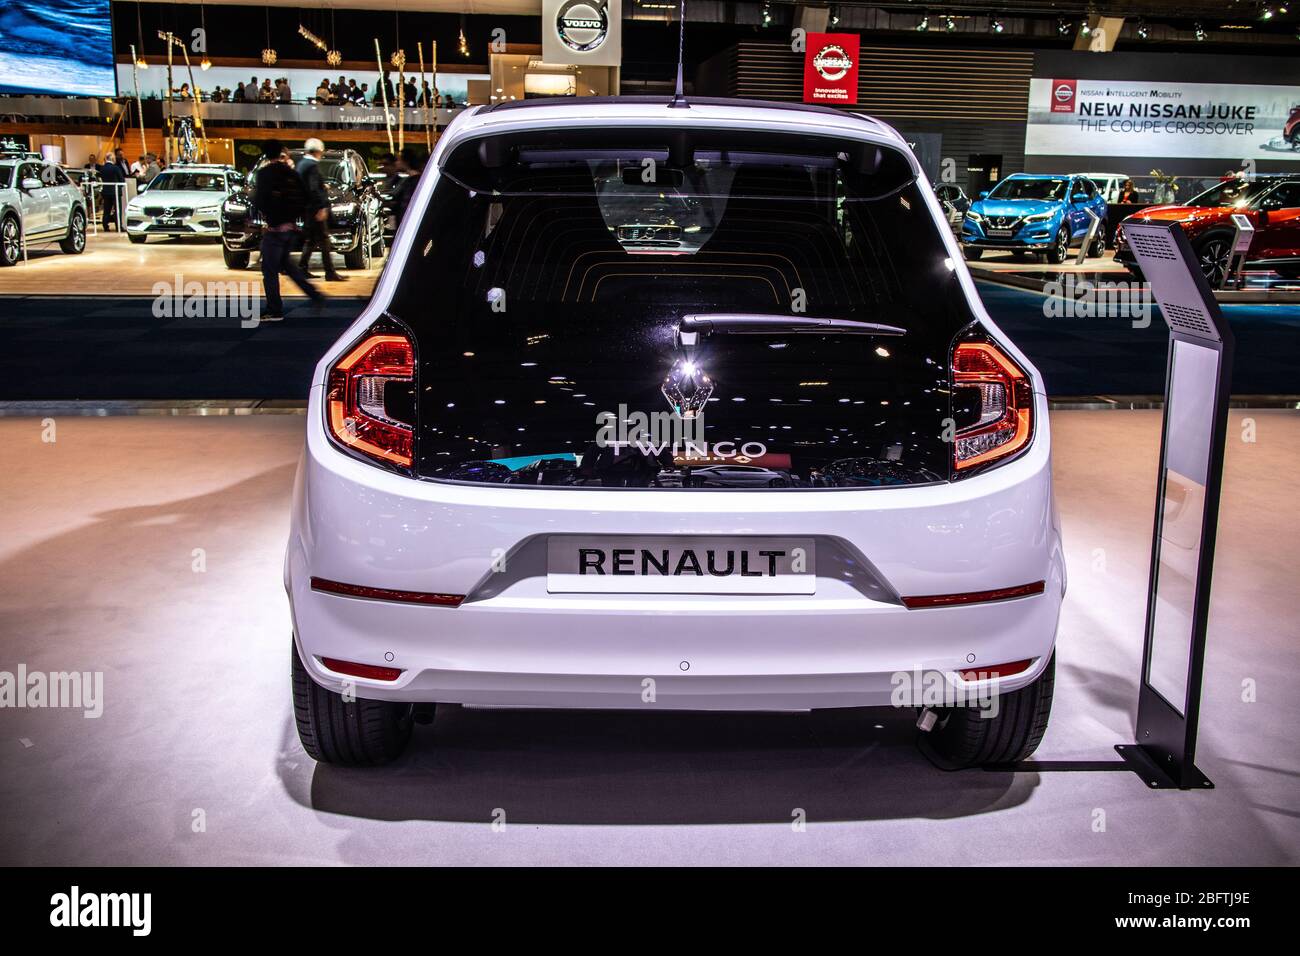 Brussels, Belgium, Jan 2020: Renault Twingo, Brussels Motor Show, third generation, MK3, rear-engine, rear-wheel-drive city car produced by Renault Stock Photo